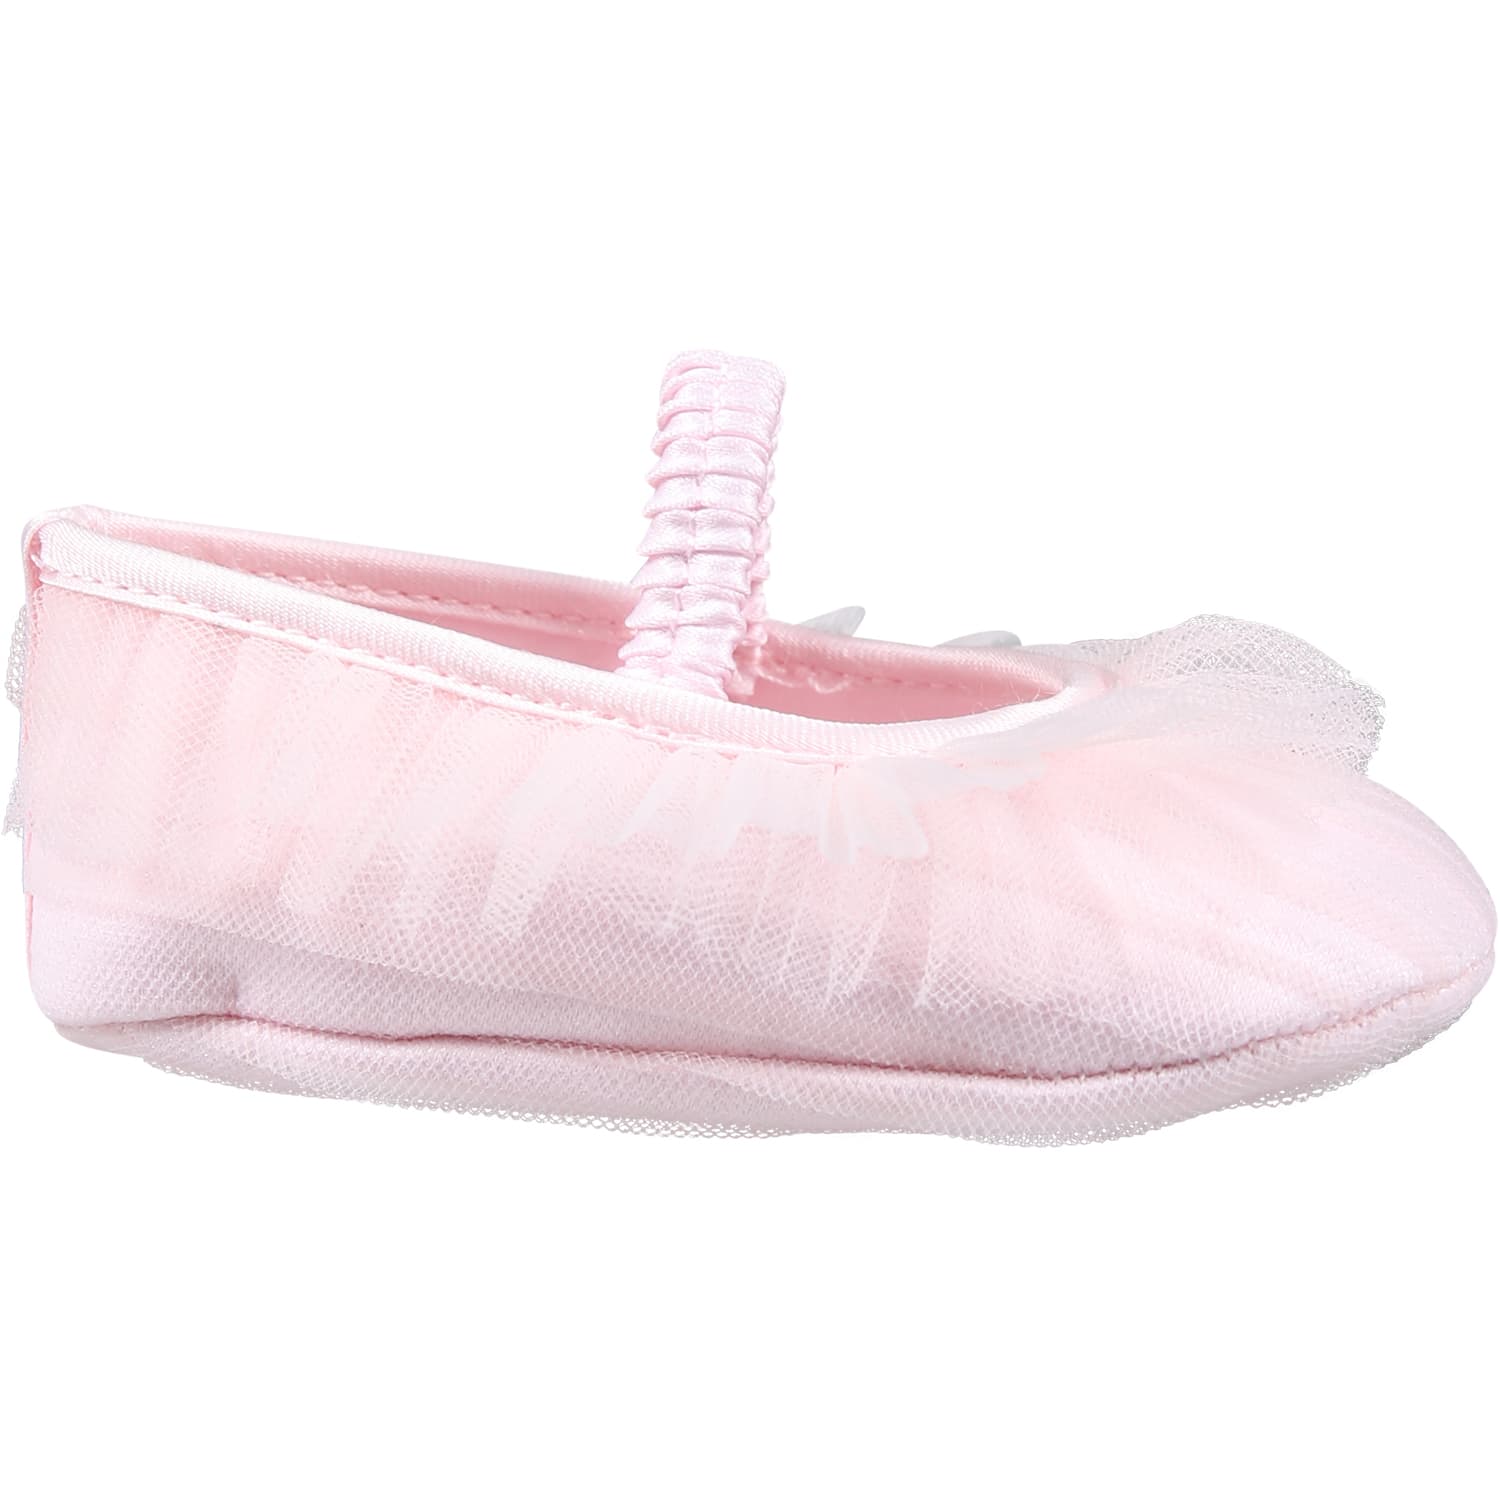 Monnalisa Kids' Pink Ballet Flats For Baby Girl With Tulle